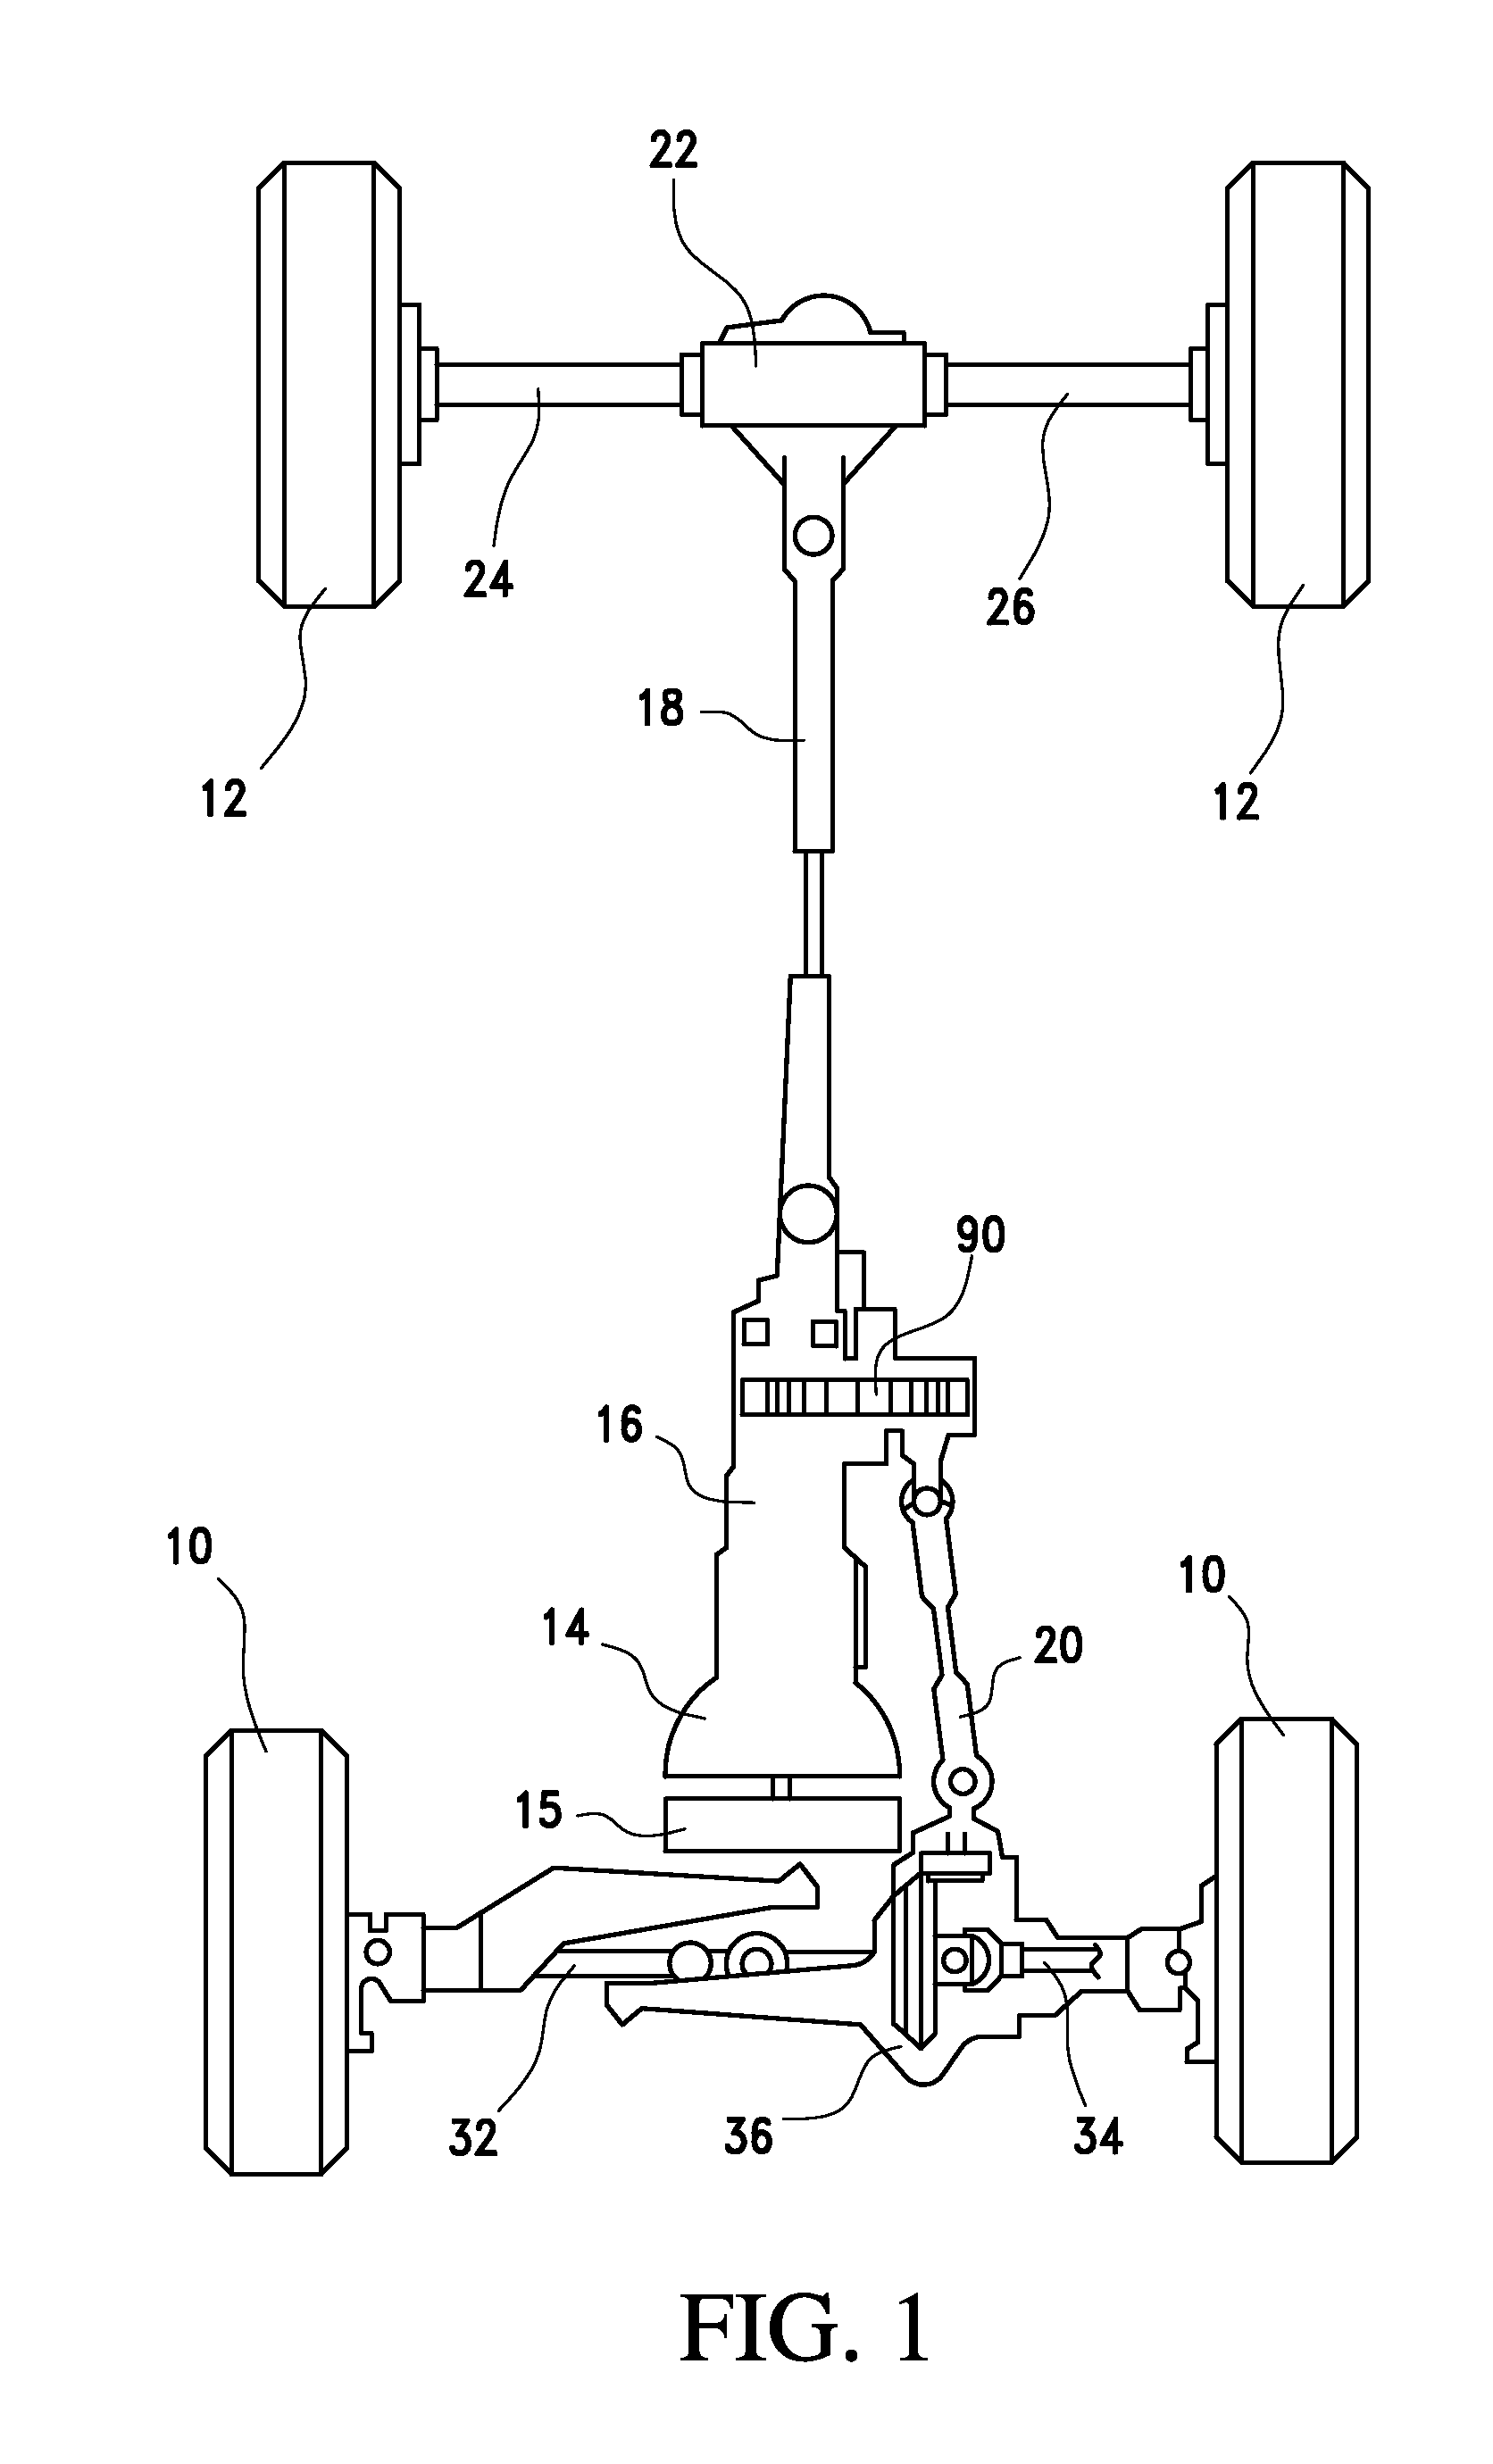 Transfer Case for a Motor Vehicle Powertrain